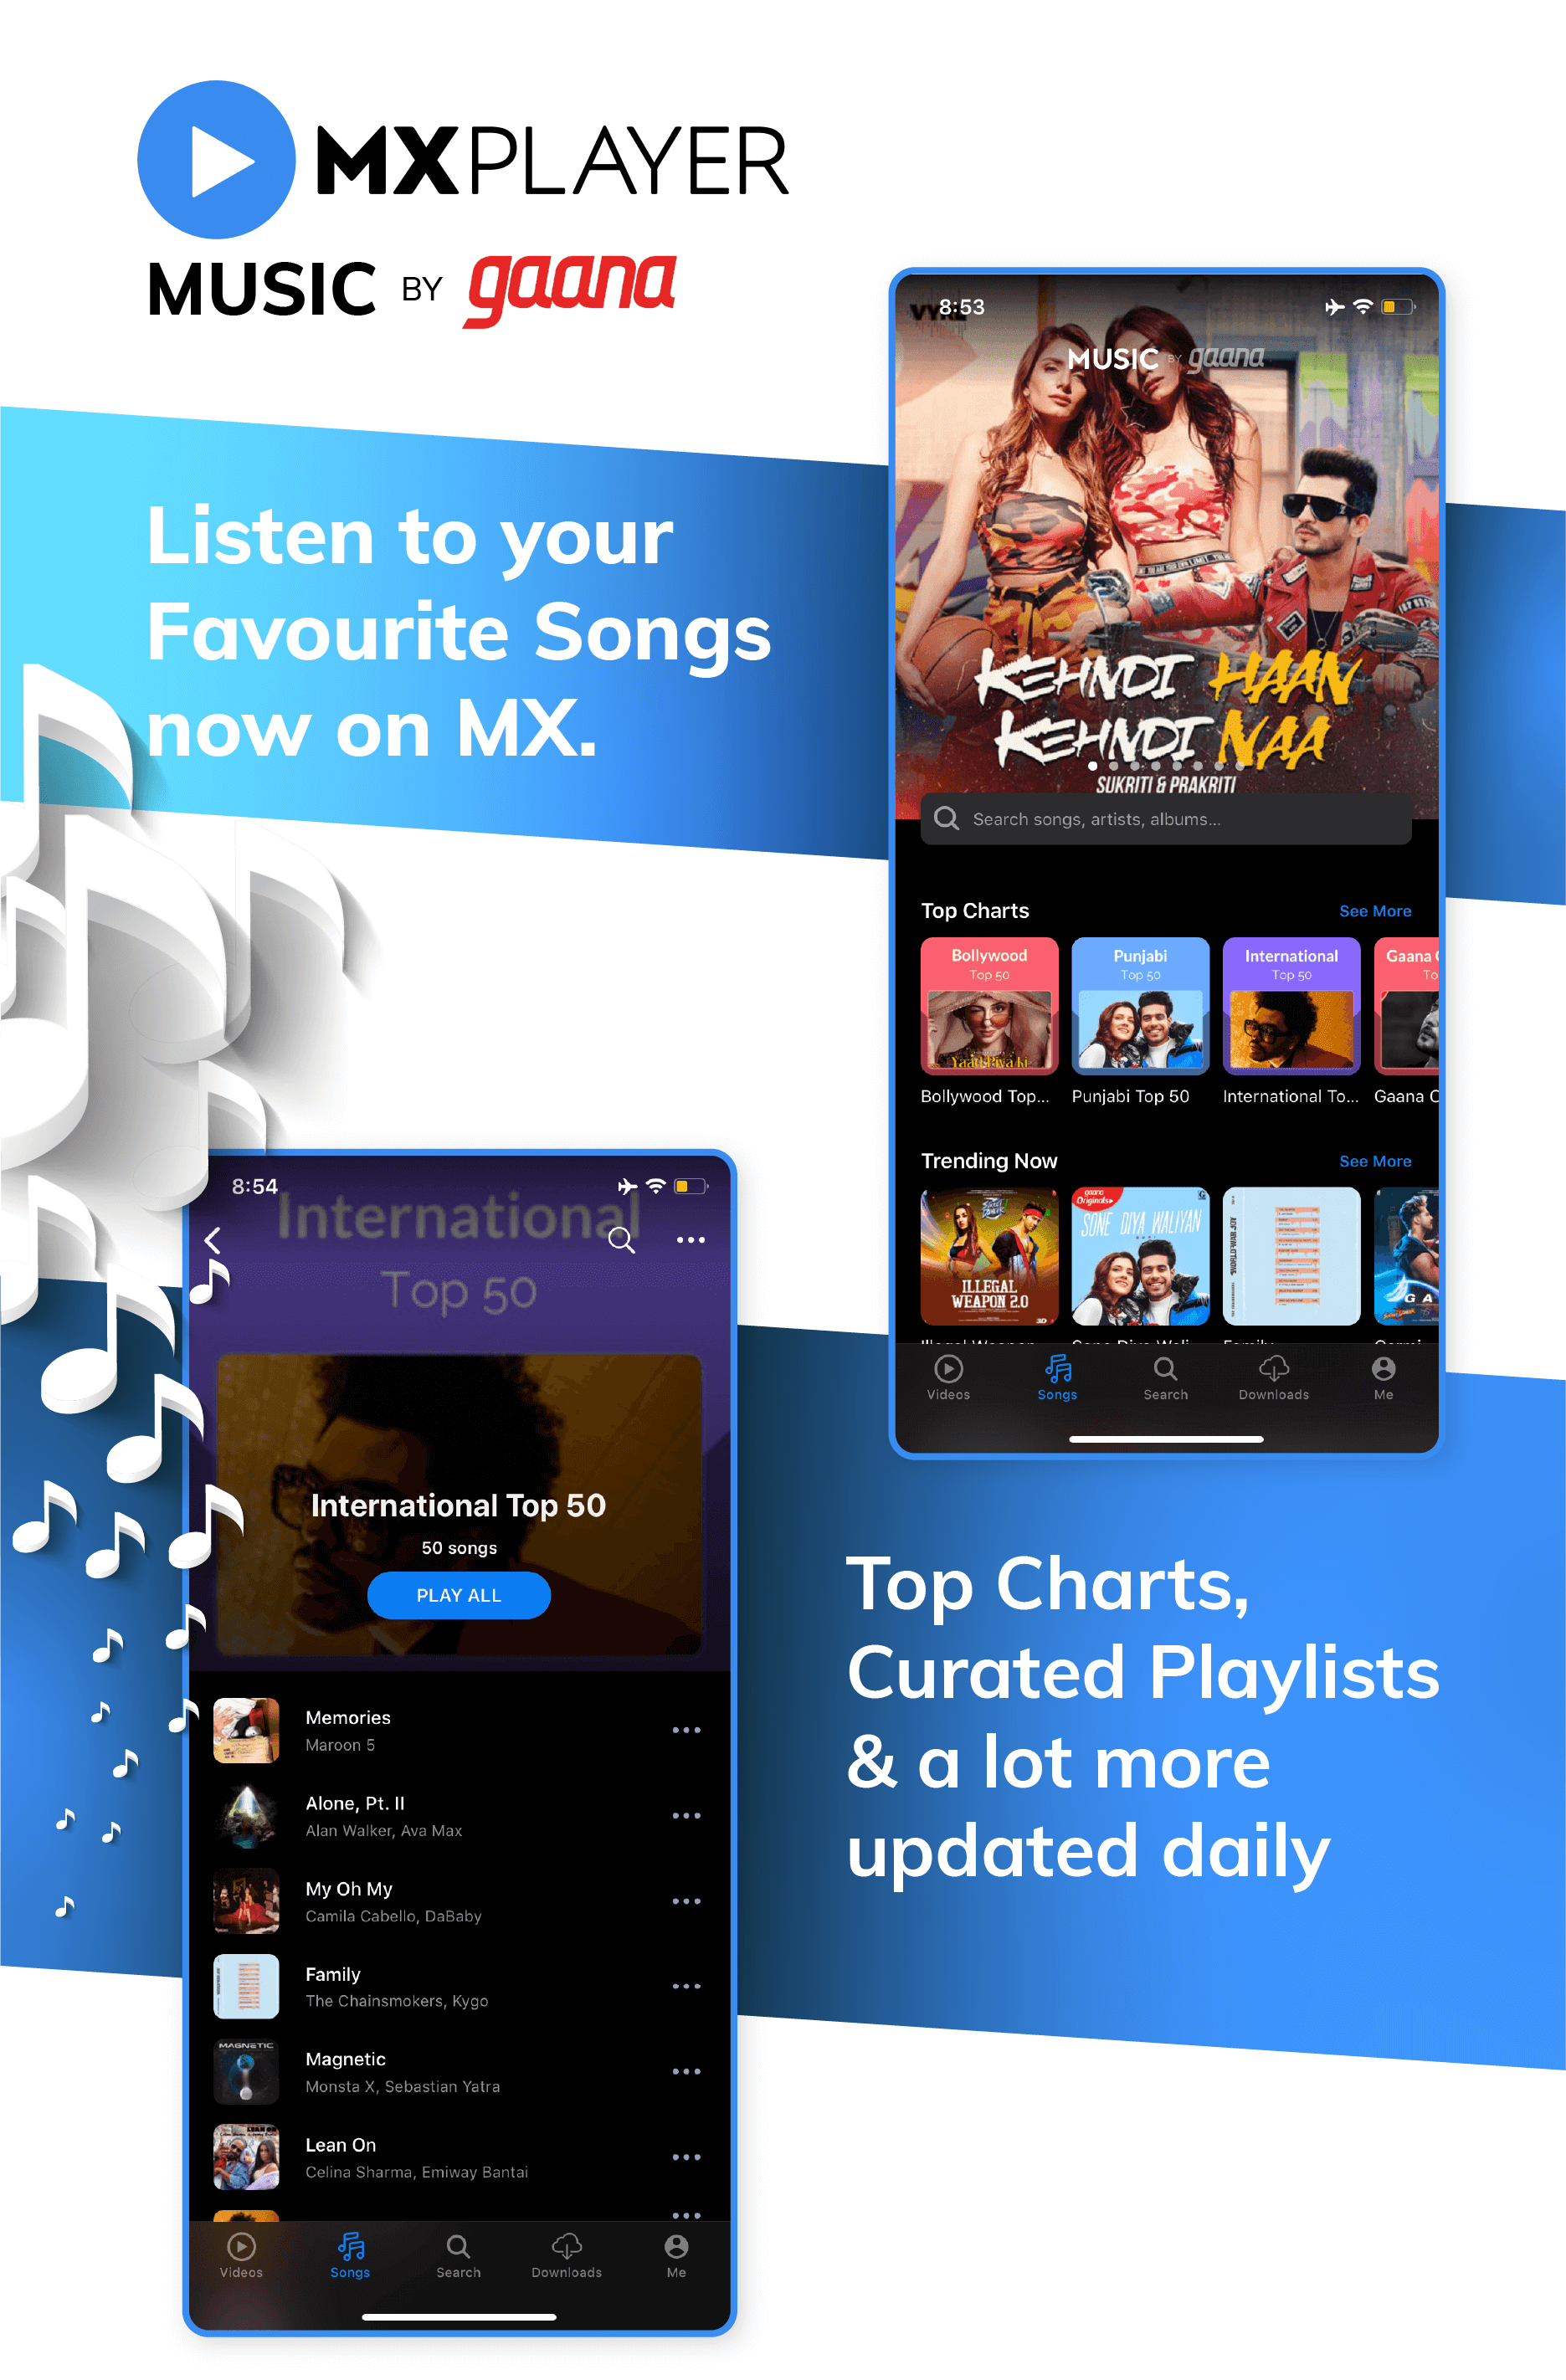 How MX Player introduced Audio Streaming for over 200 Million Users